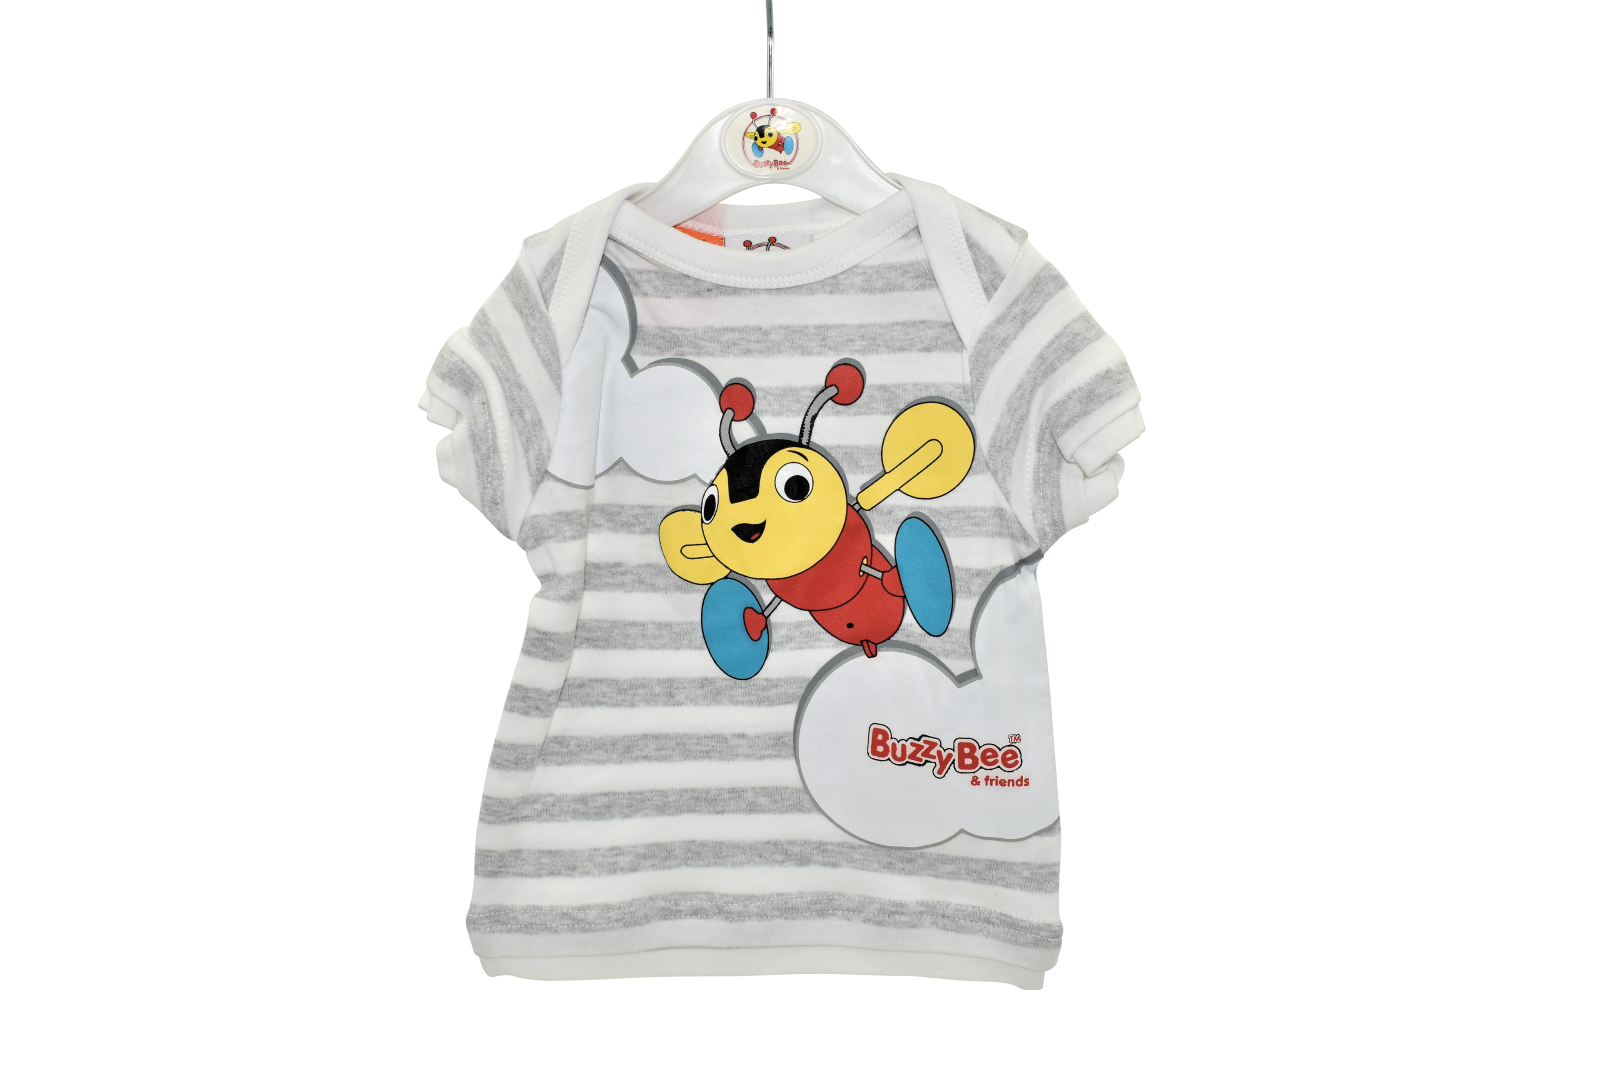 Buzzy Bee T-Shirt - Size 00